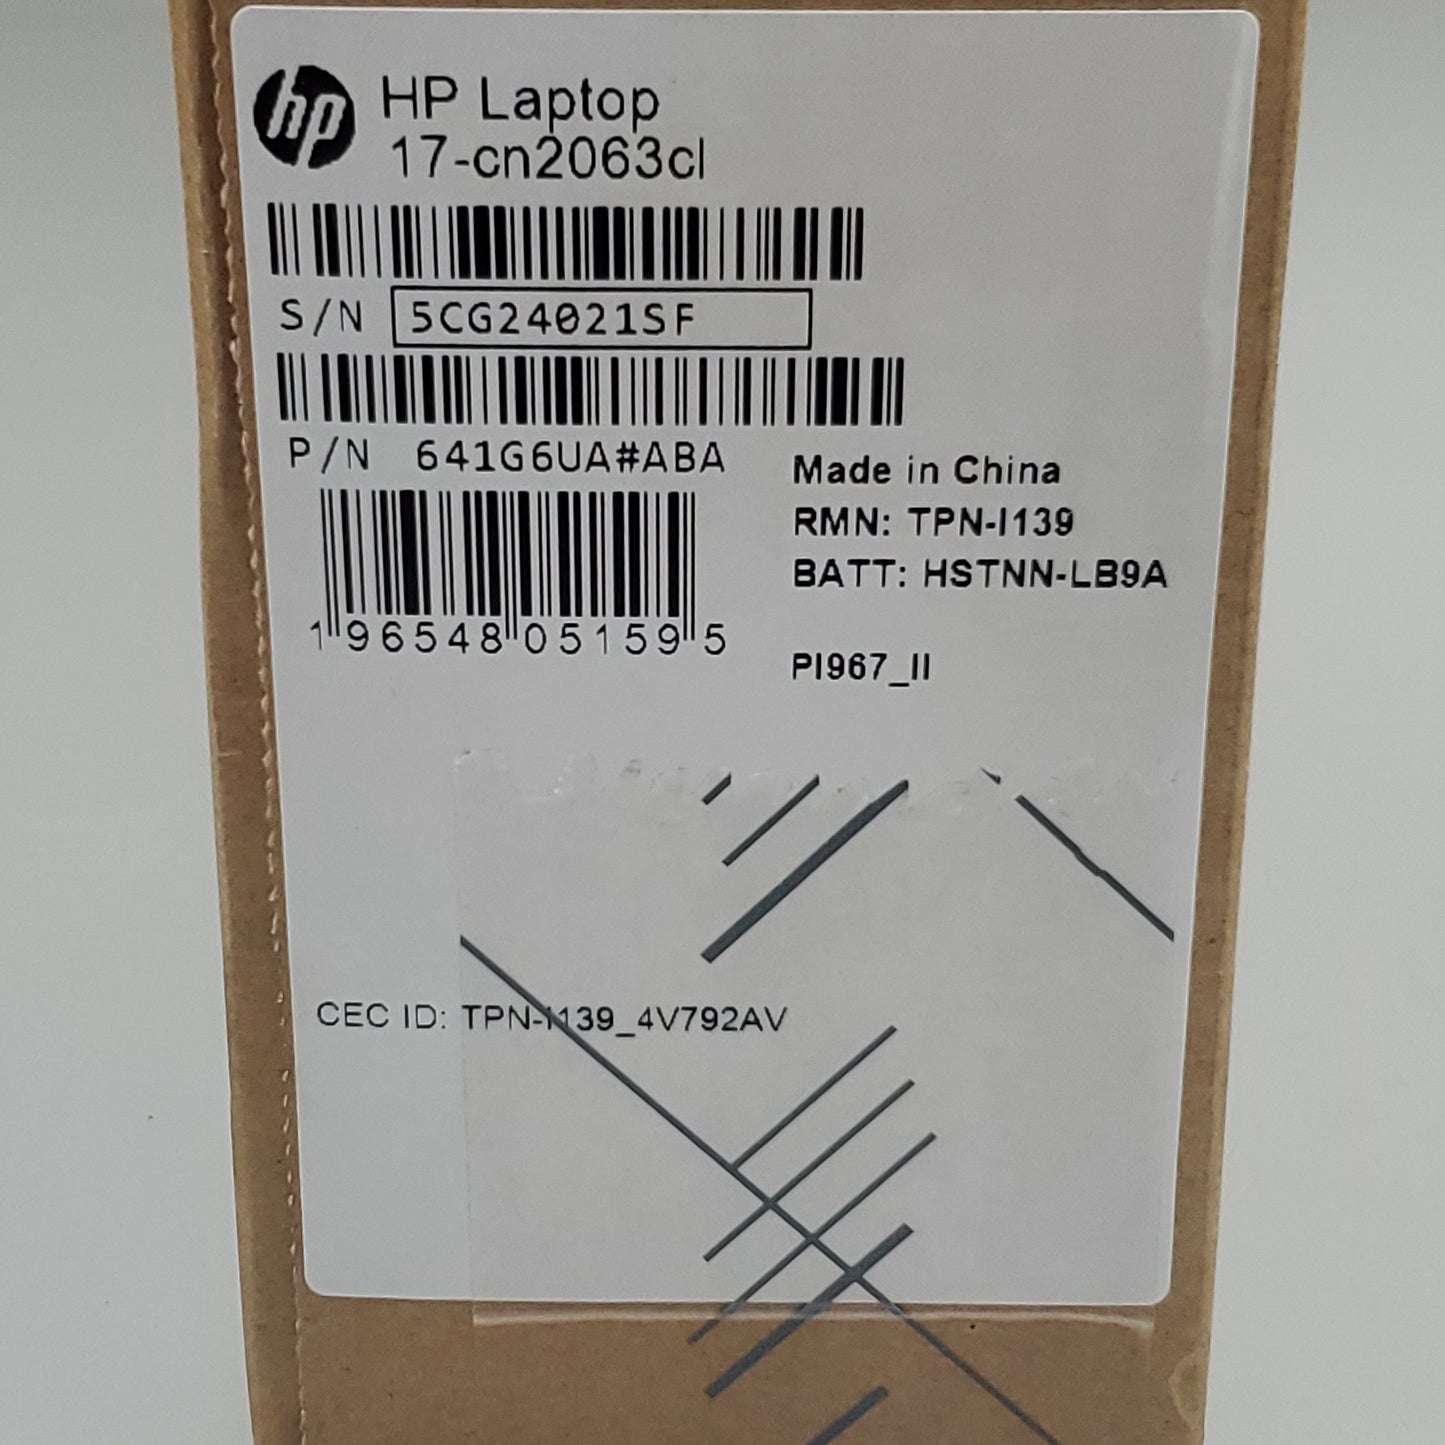 HP Laptop Non-Touch i5-1235U 512 SSD 12GB RAM Win11 17.3" 17-cn2063cl (New)